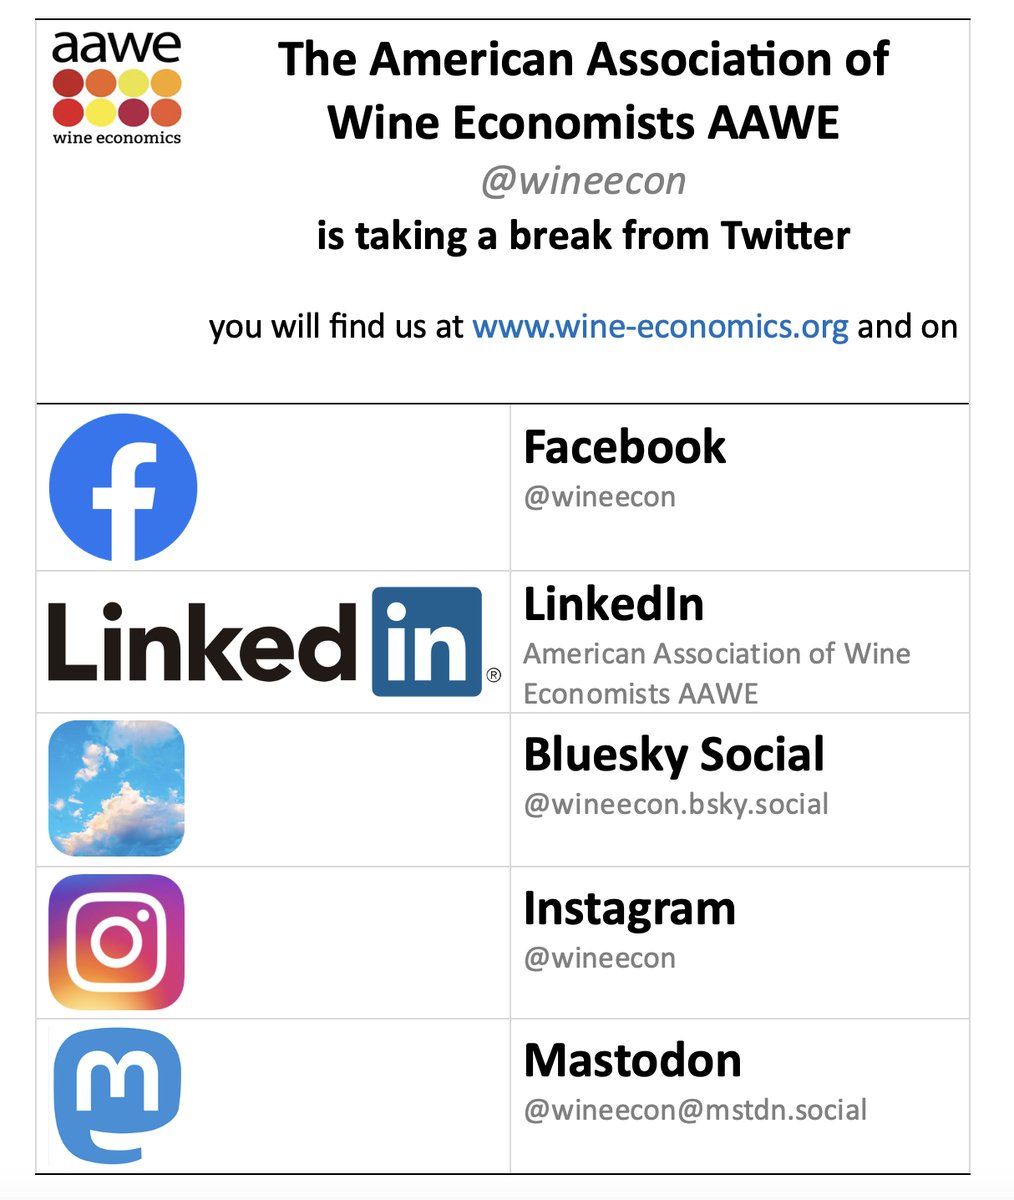 The American Association of Wine Economists AAWE @wineecon is taking a break from Twitter. You will find us on Facebook, LinkedIn, Bluesky, Instagram, and Mastodon - and, of course, at wine-economics.org